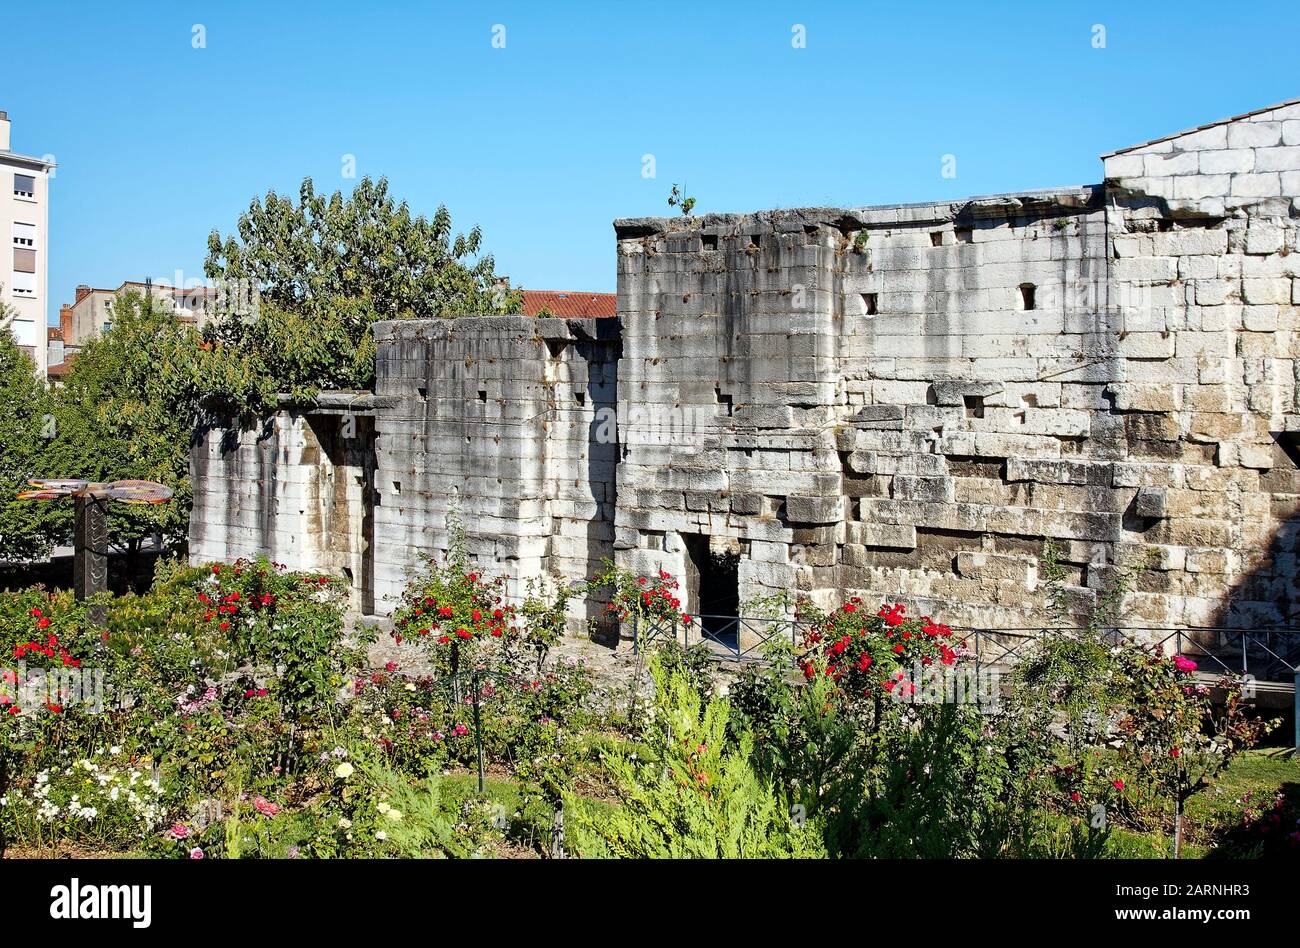 Cybele Archeological Garden, flowers, old Roman ruins, stone, ancient remains, contrasting textures, Vienne, France, summer, horizontal Stock Photo